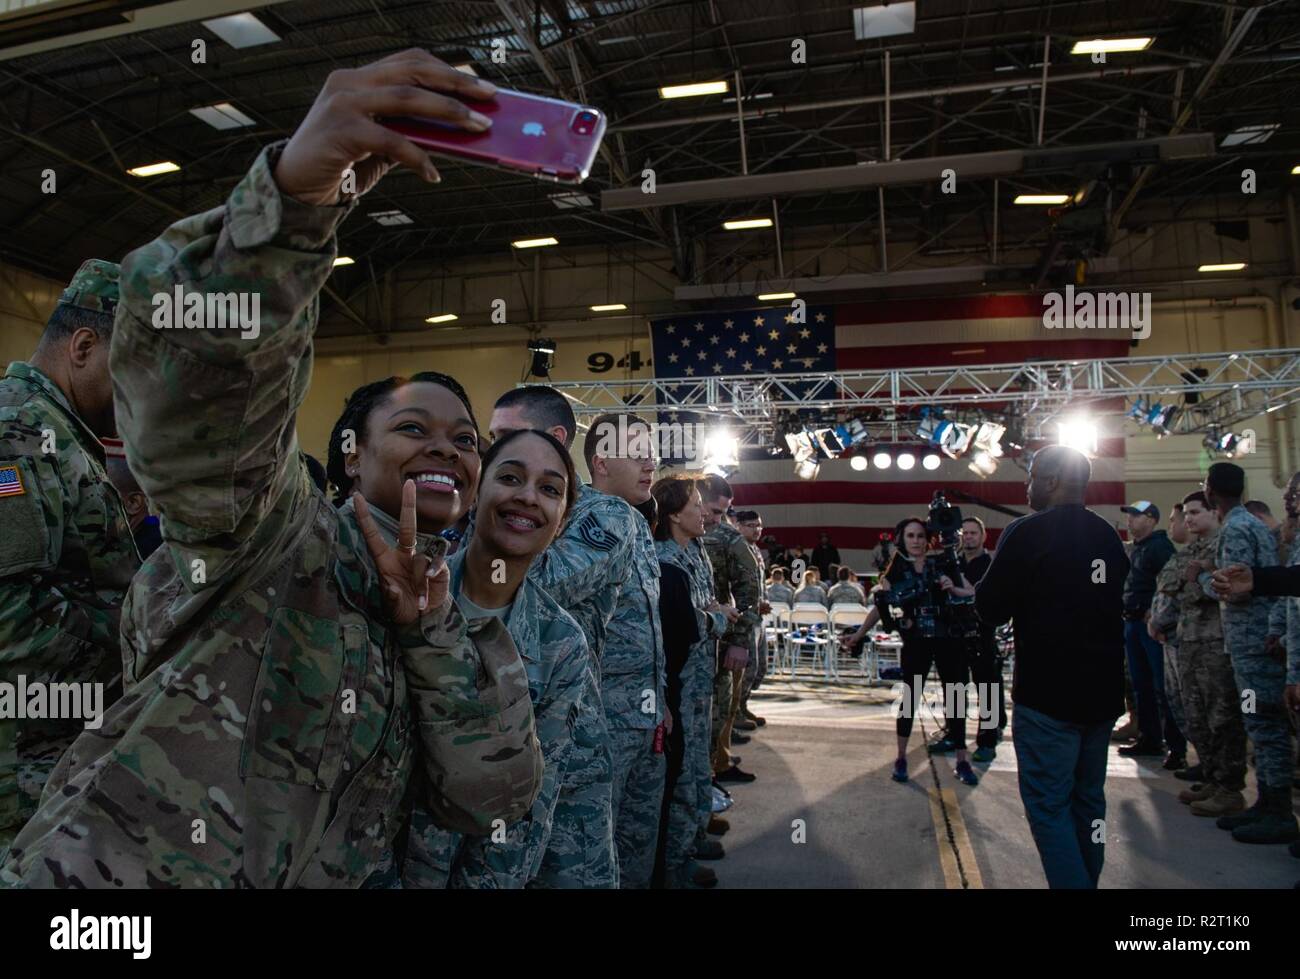 An Airman takes a photo during an ESPN First Take live show at Luke Air Force Base, Ariz., Nov. 9, 2018. Before starting the show, Airmen had the opportunity to meet and interact with the show hosts and take pictures. Stock Photo